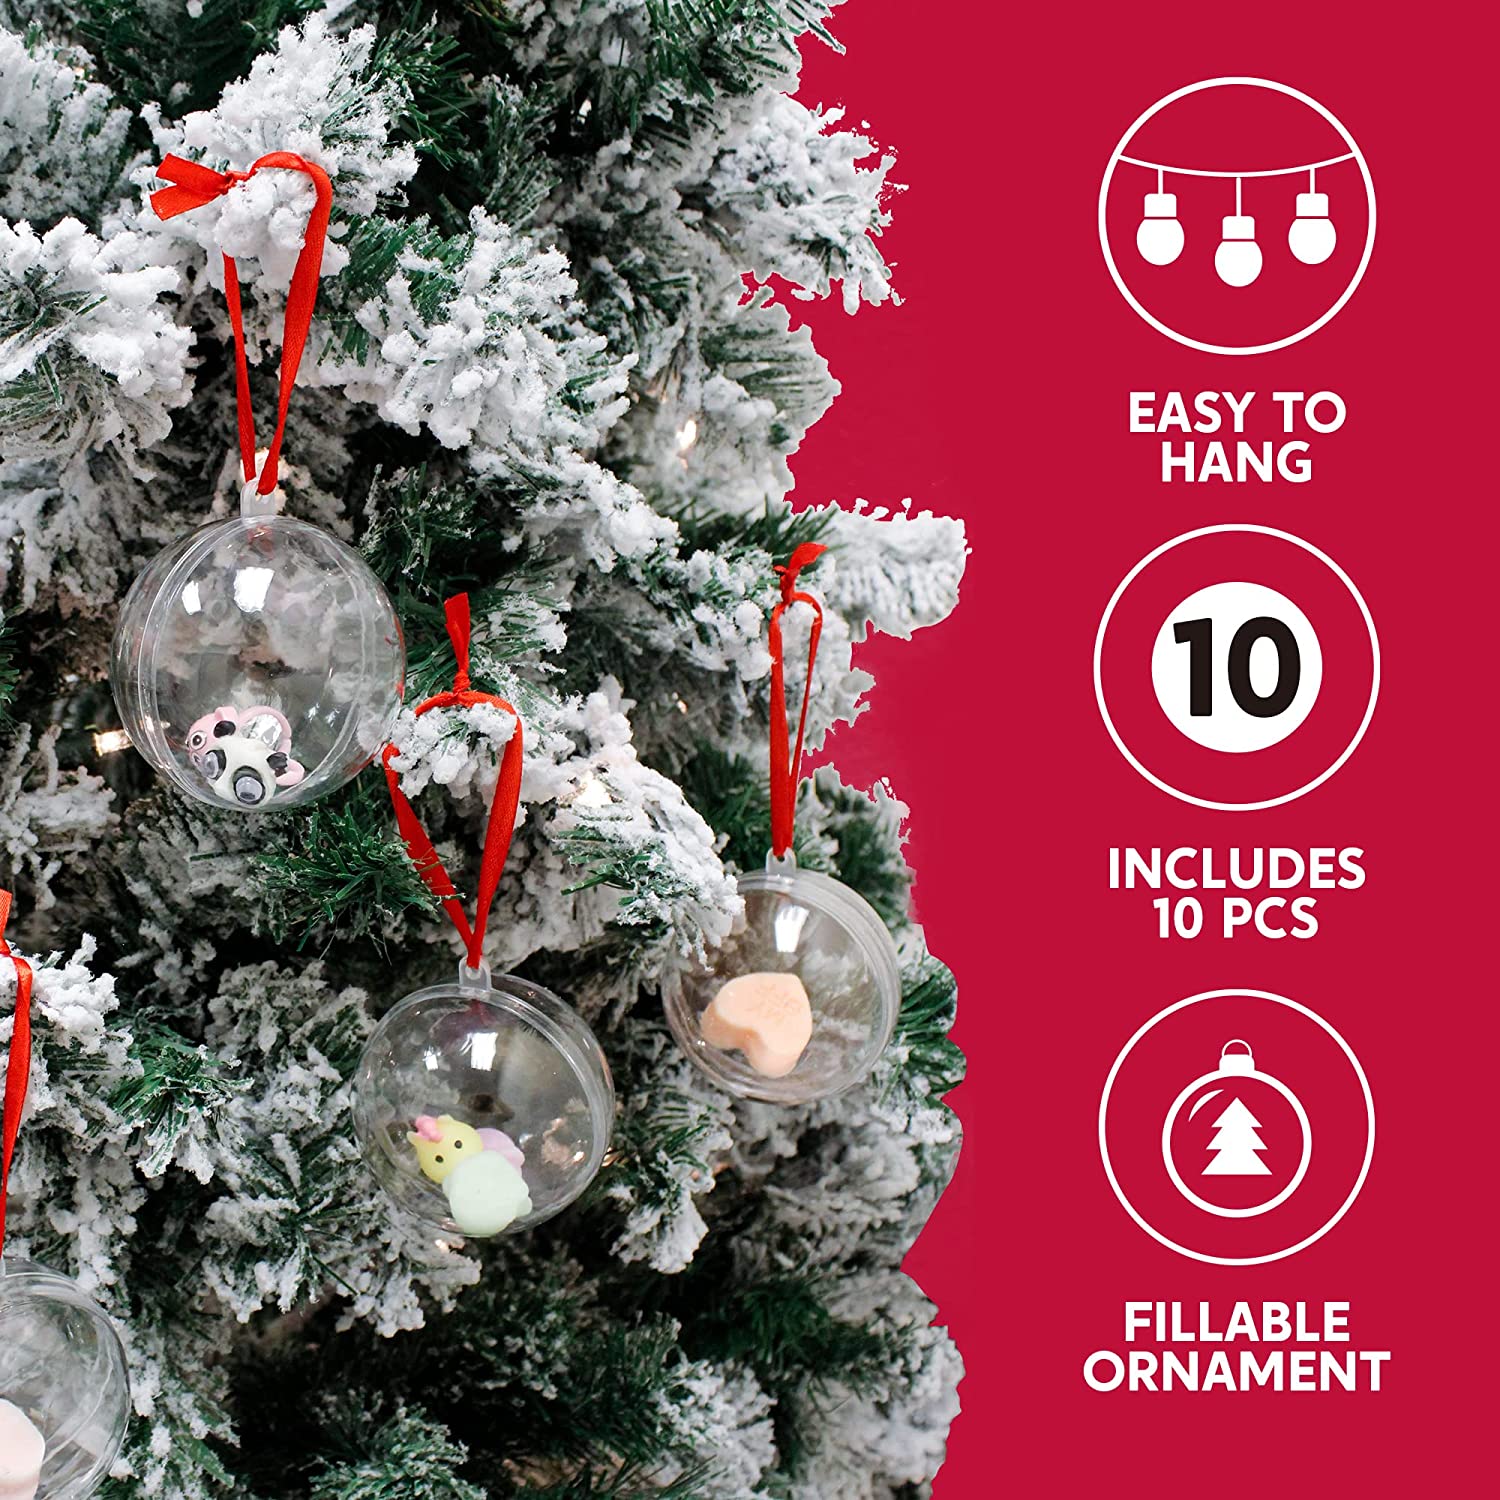 20pcs Clear Plastic Fillable Ornaments Ball for Christmas Tree